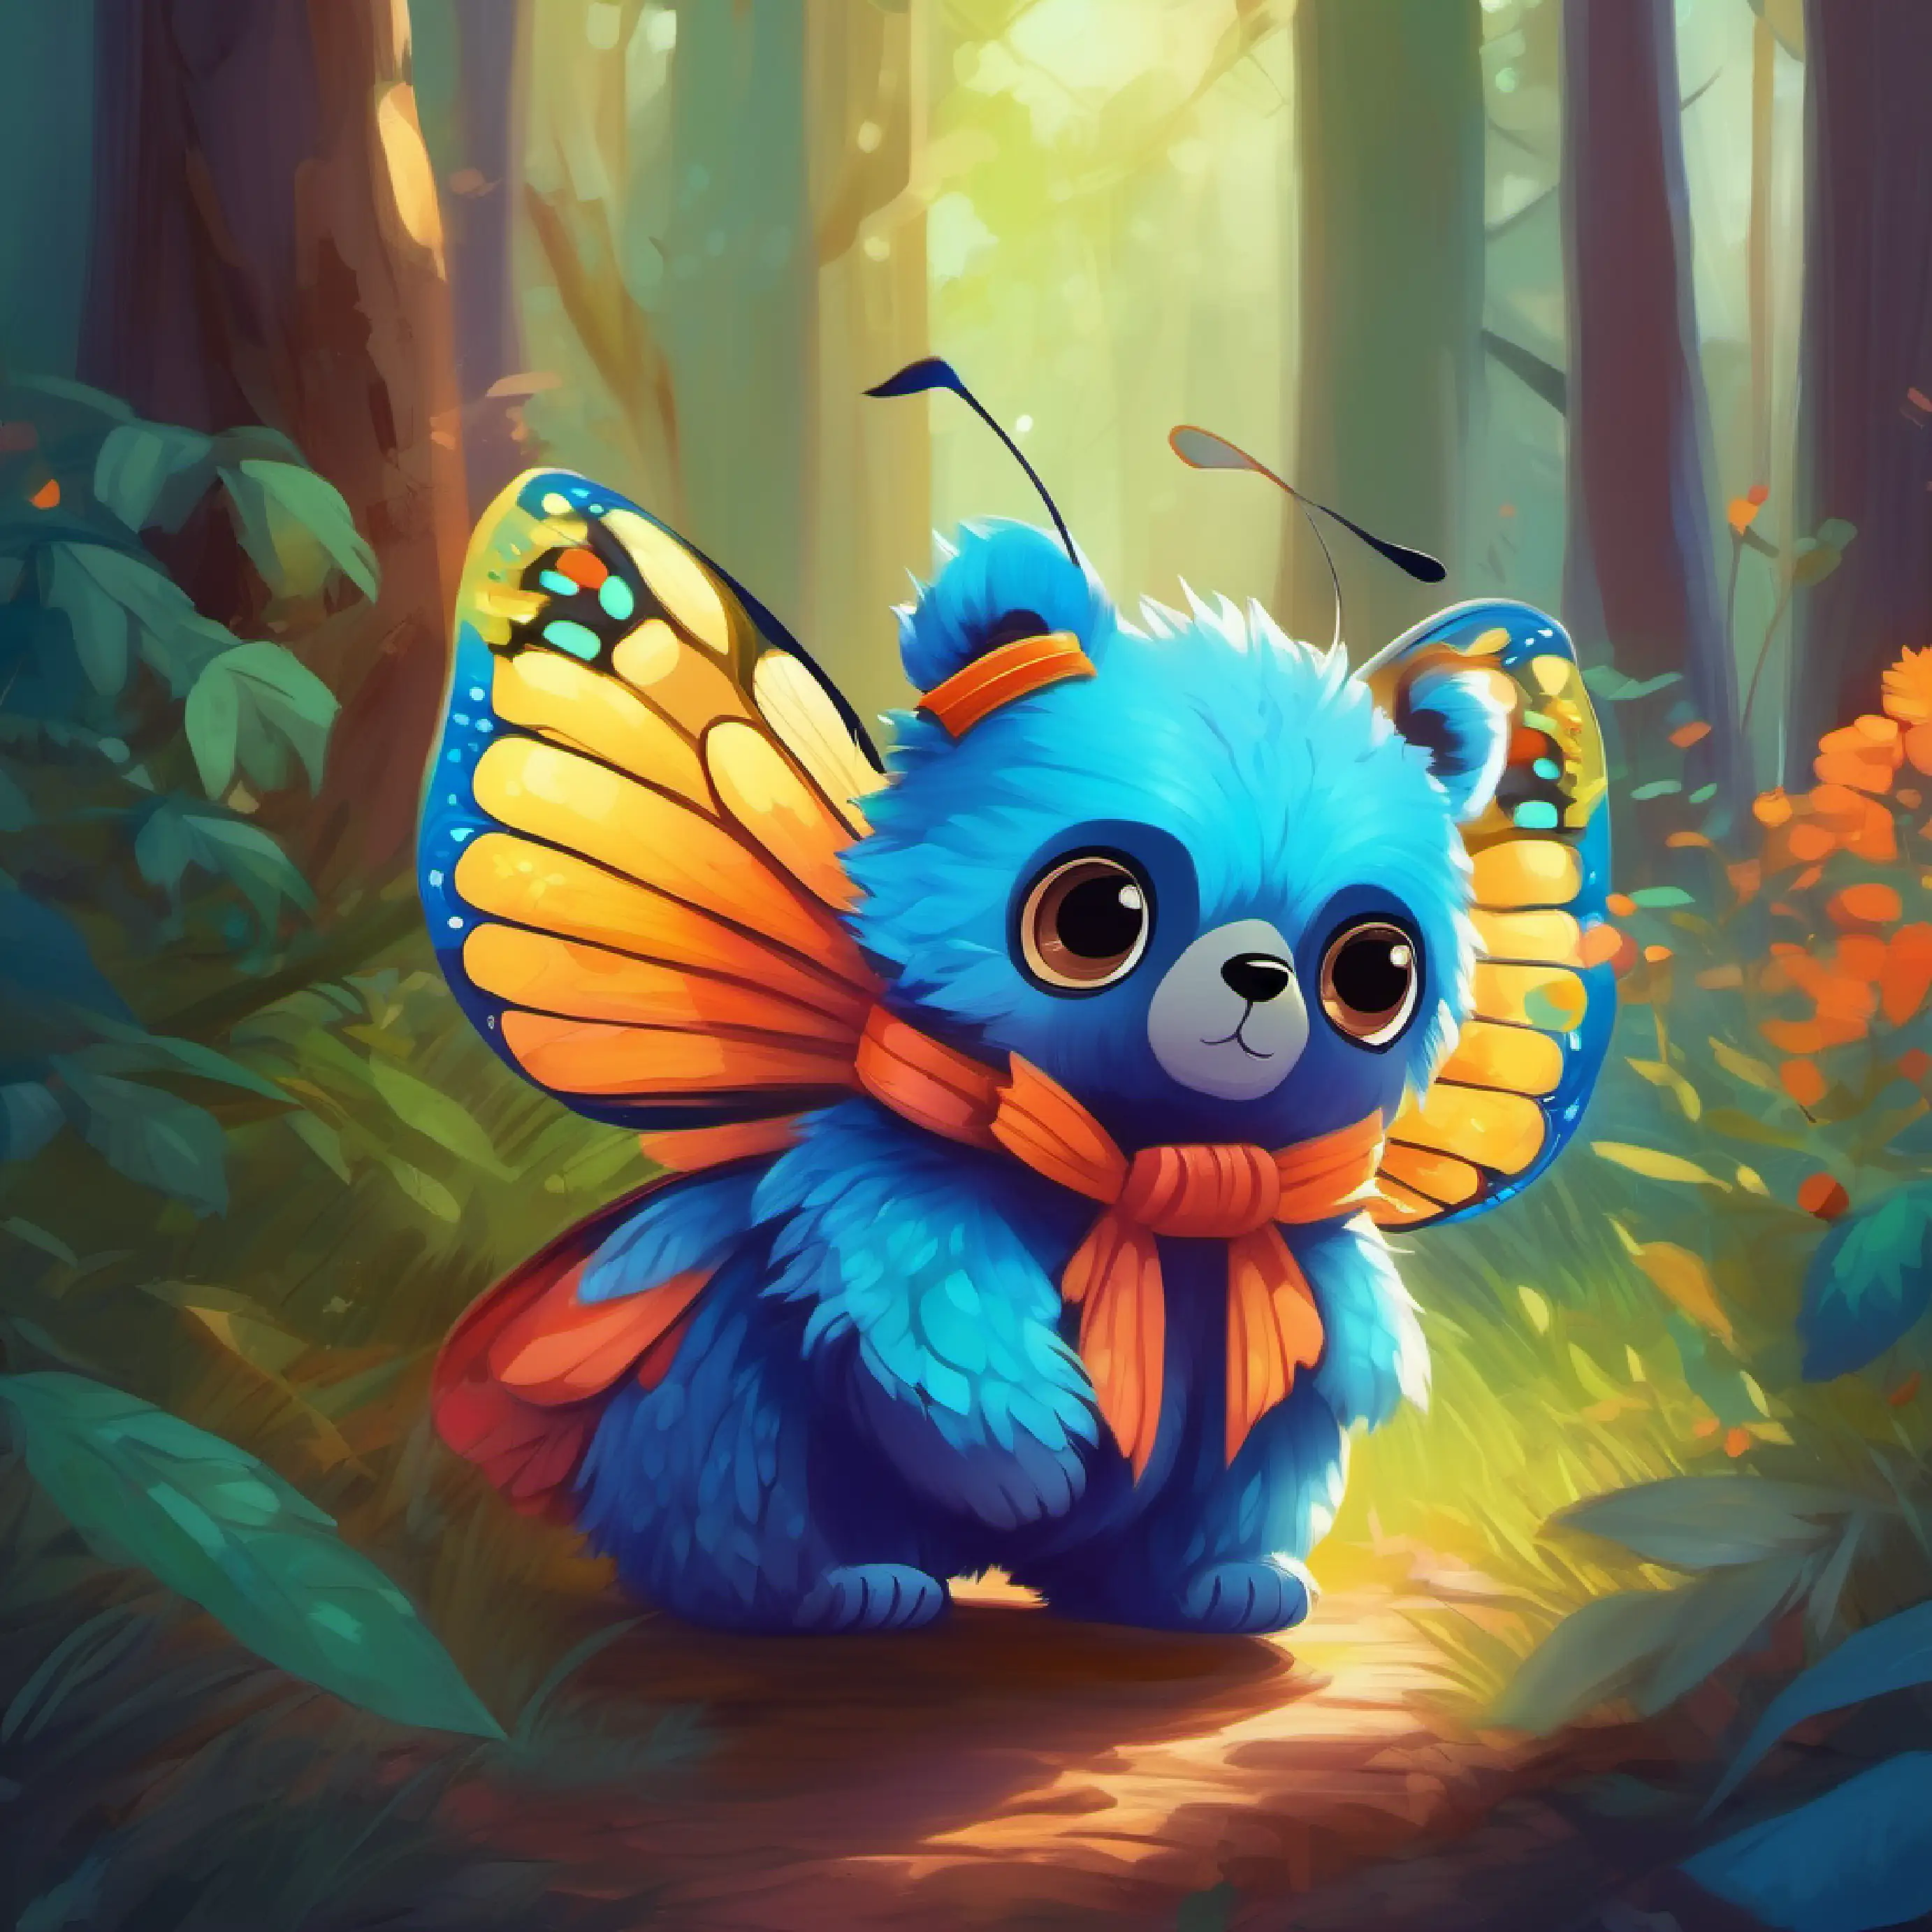 Bright butterfly, many colors, always fluttering invites Little bear, fluffy, with curious brown eyes on an adventure deeper into the woods.